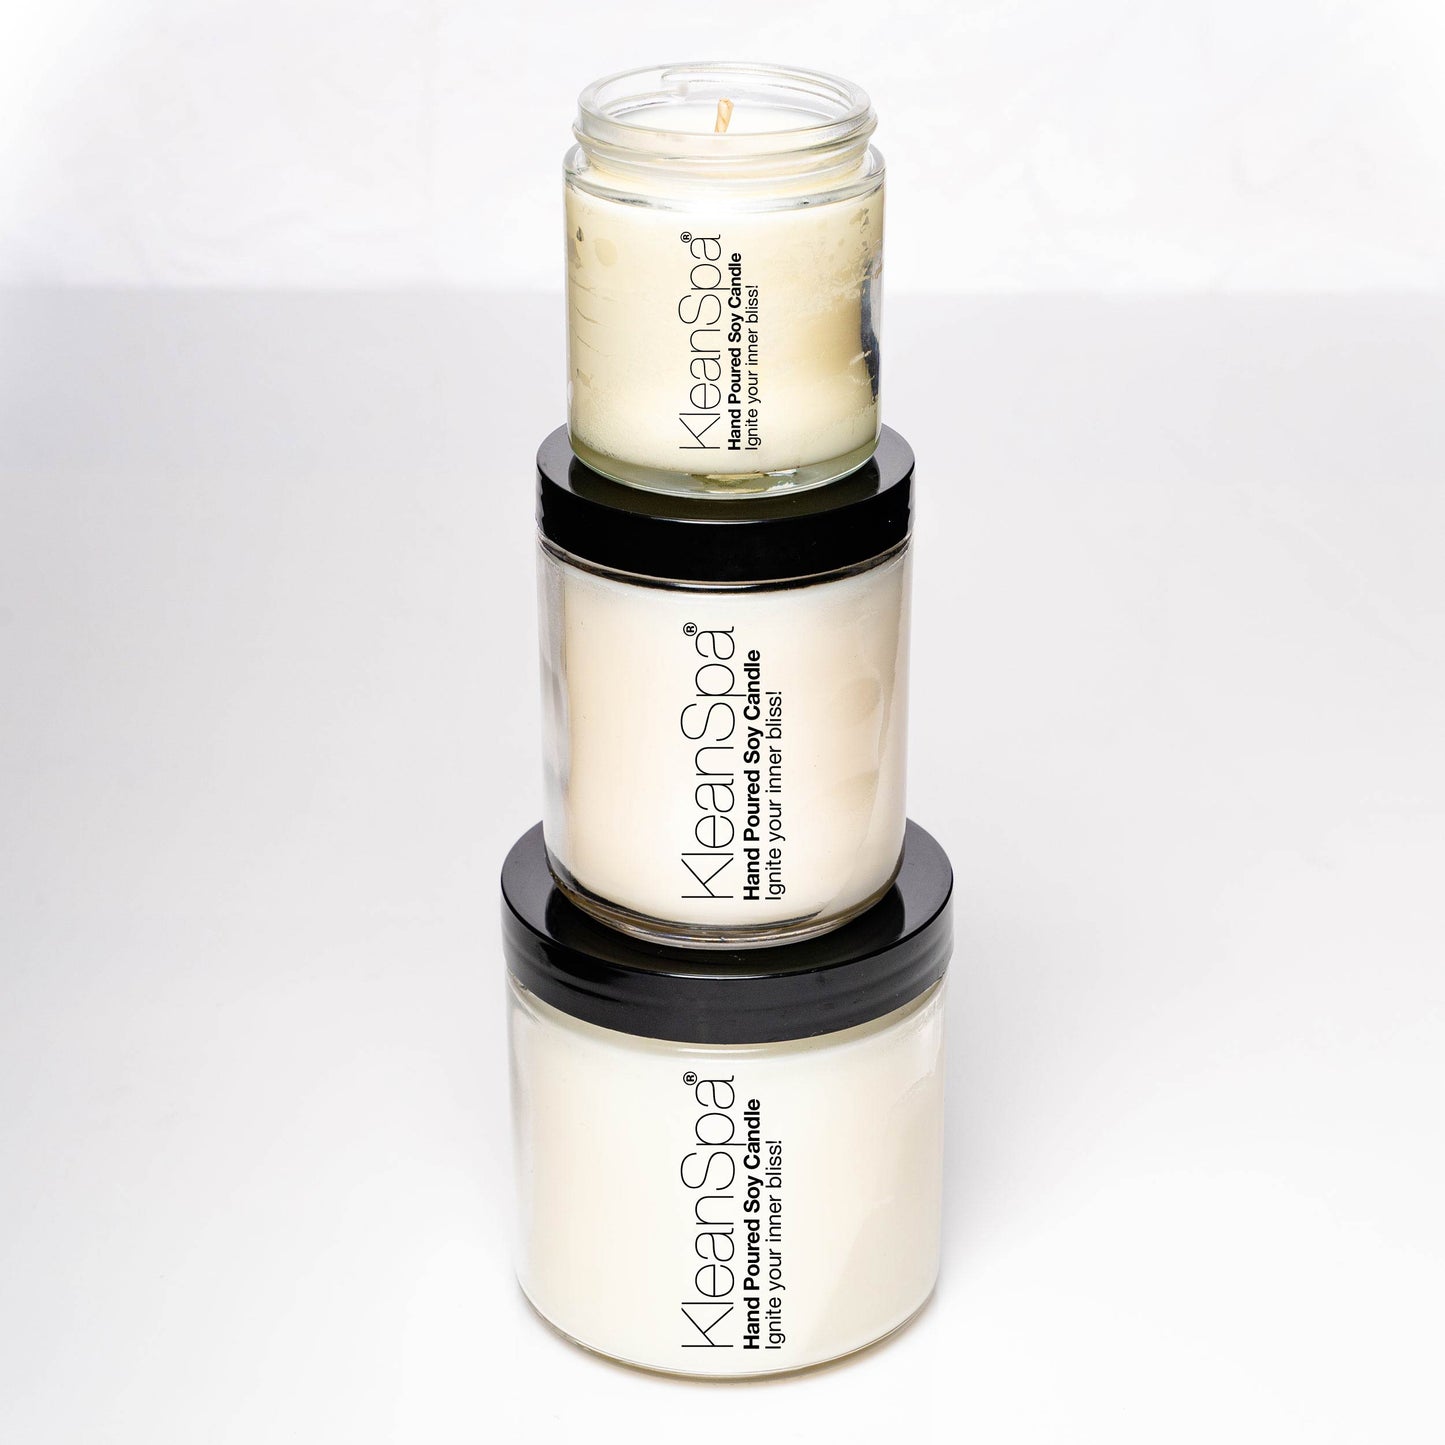 3 stacked manly soy candles